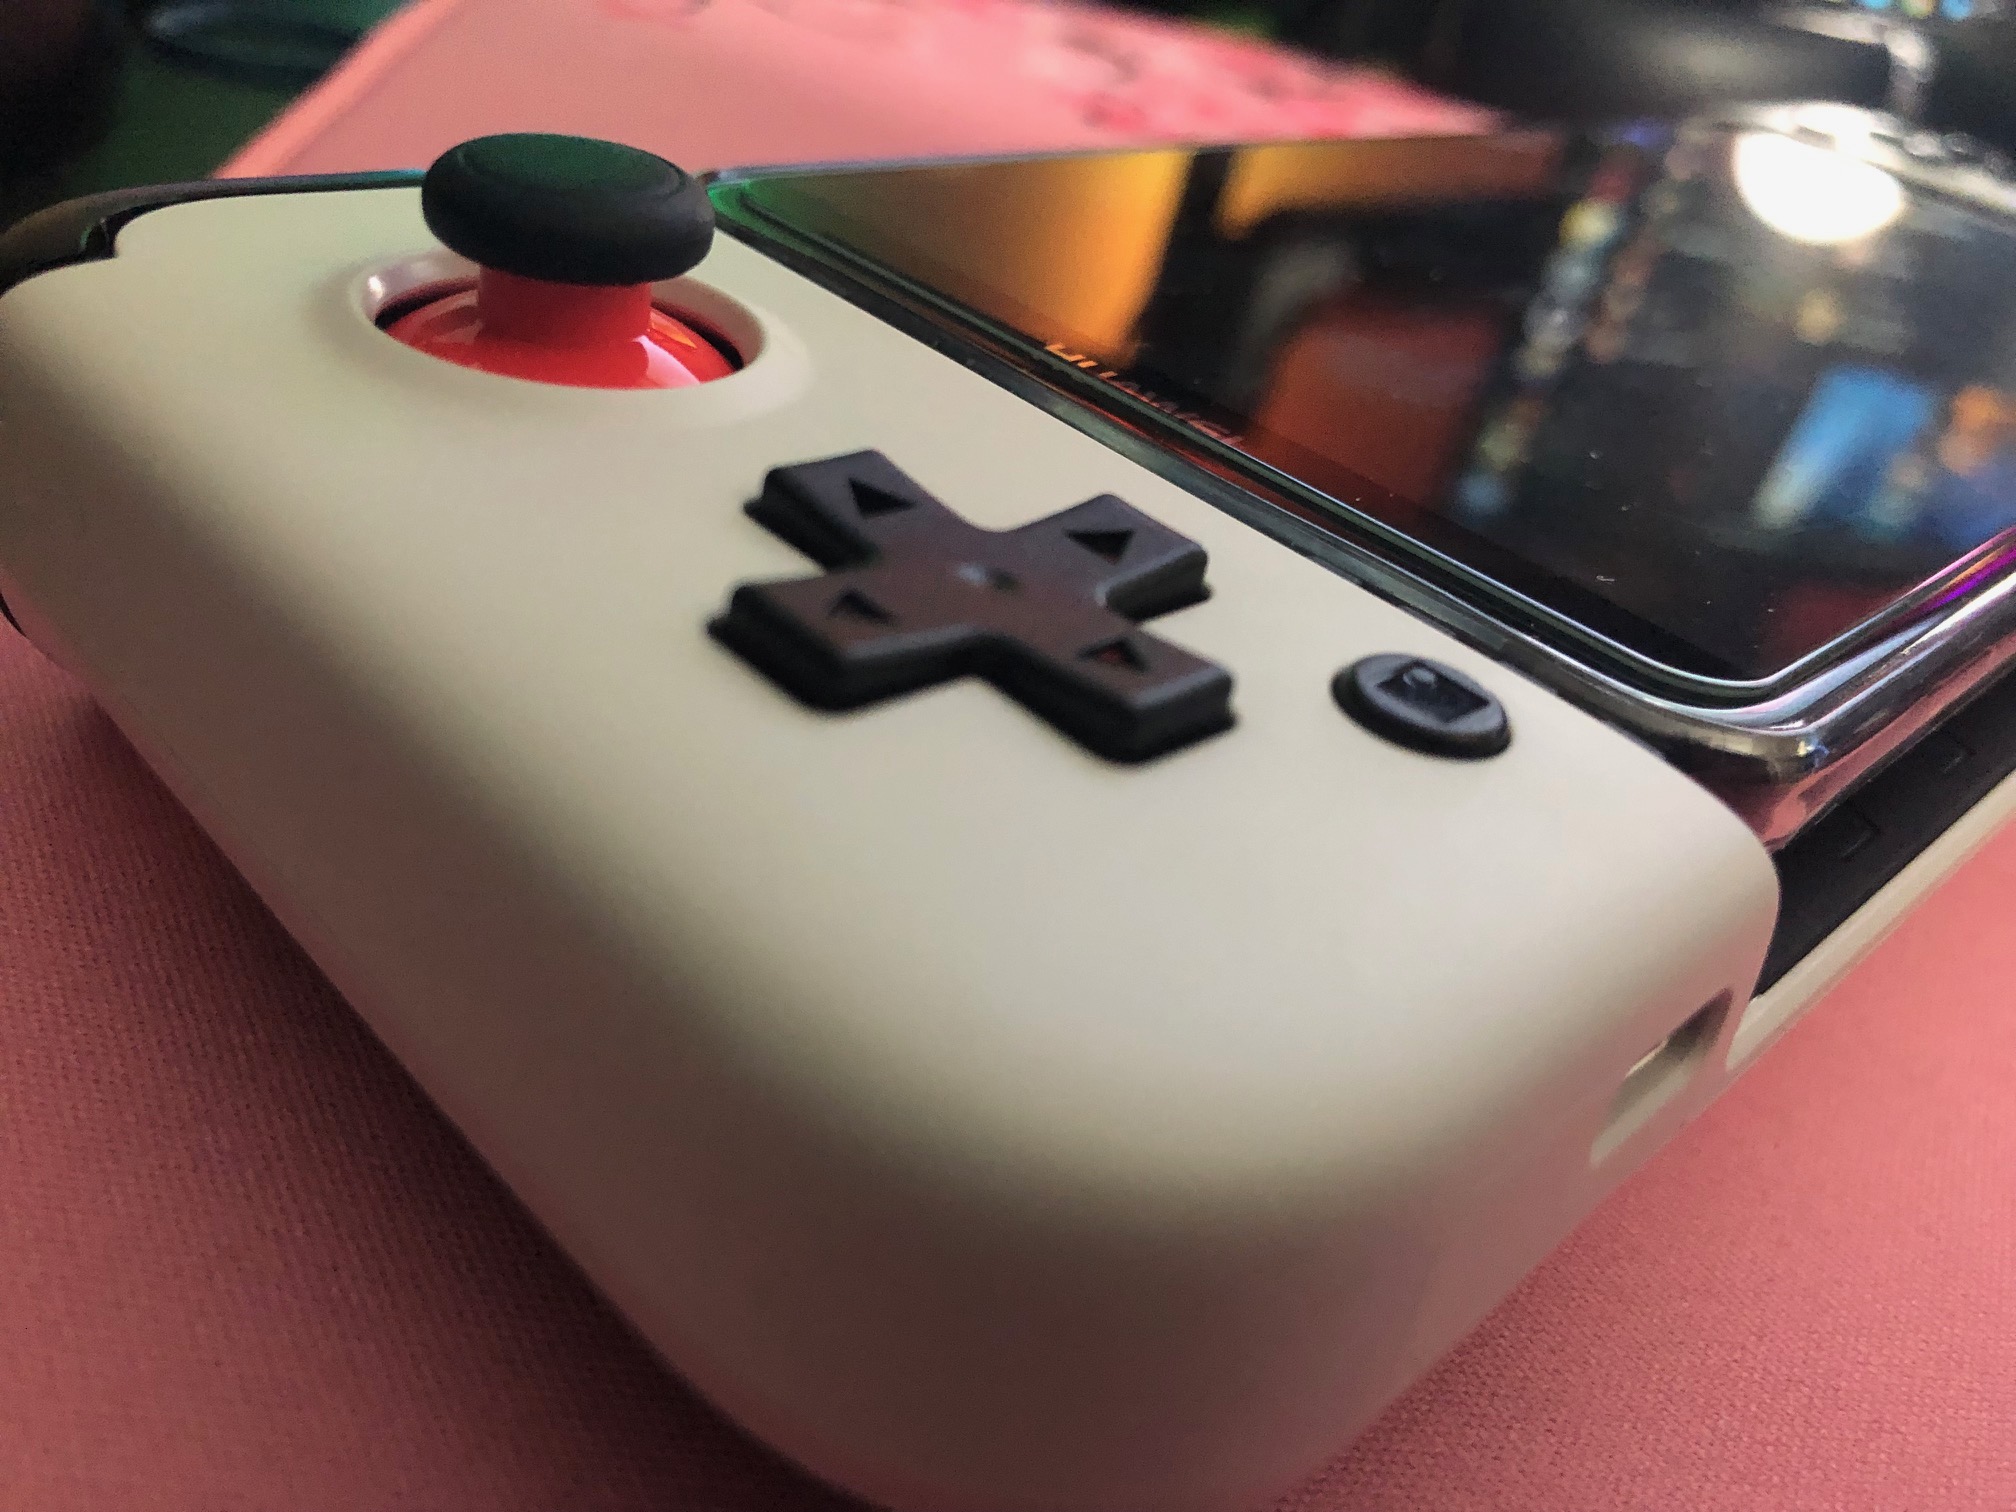 GameSir X2 Mobile Gaming Controller - 2021 Revision Review (Hardware) -  Official GBAtemp Review | GBAtemp.net - The Independent Video Game Community